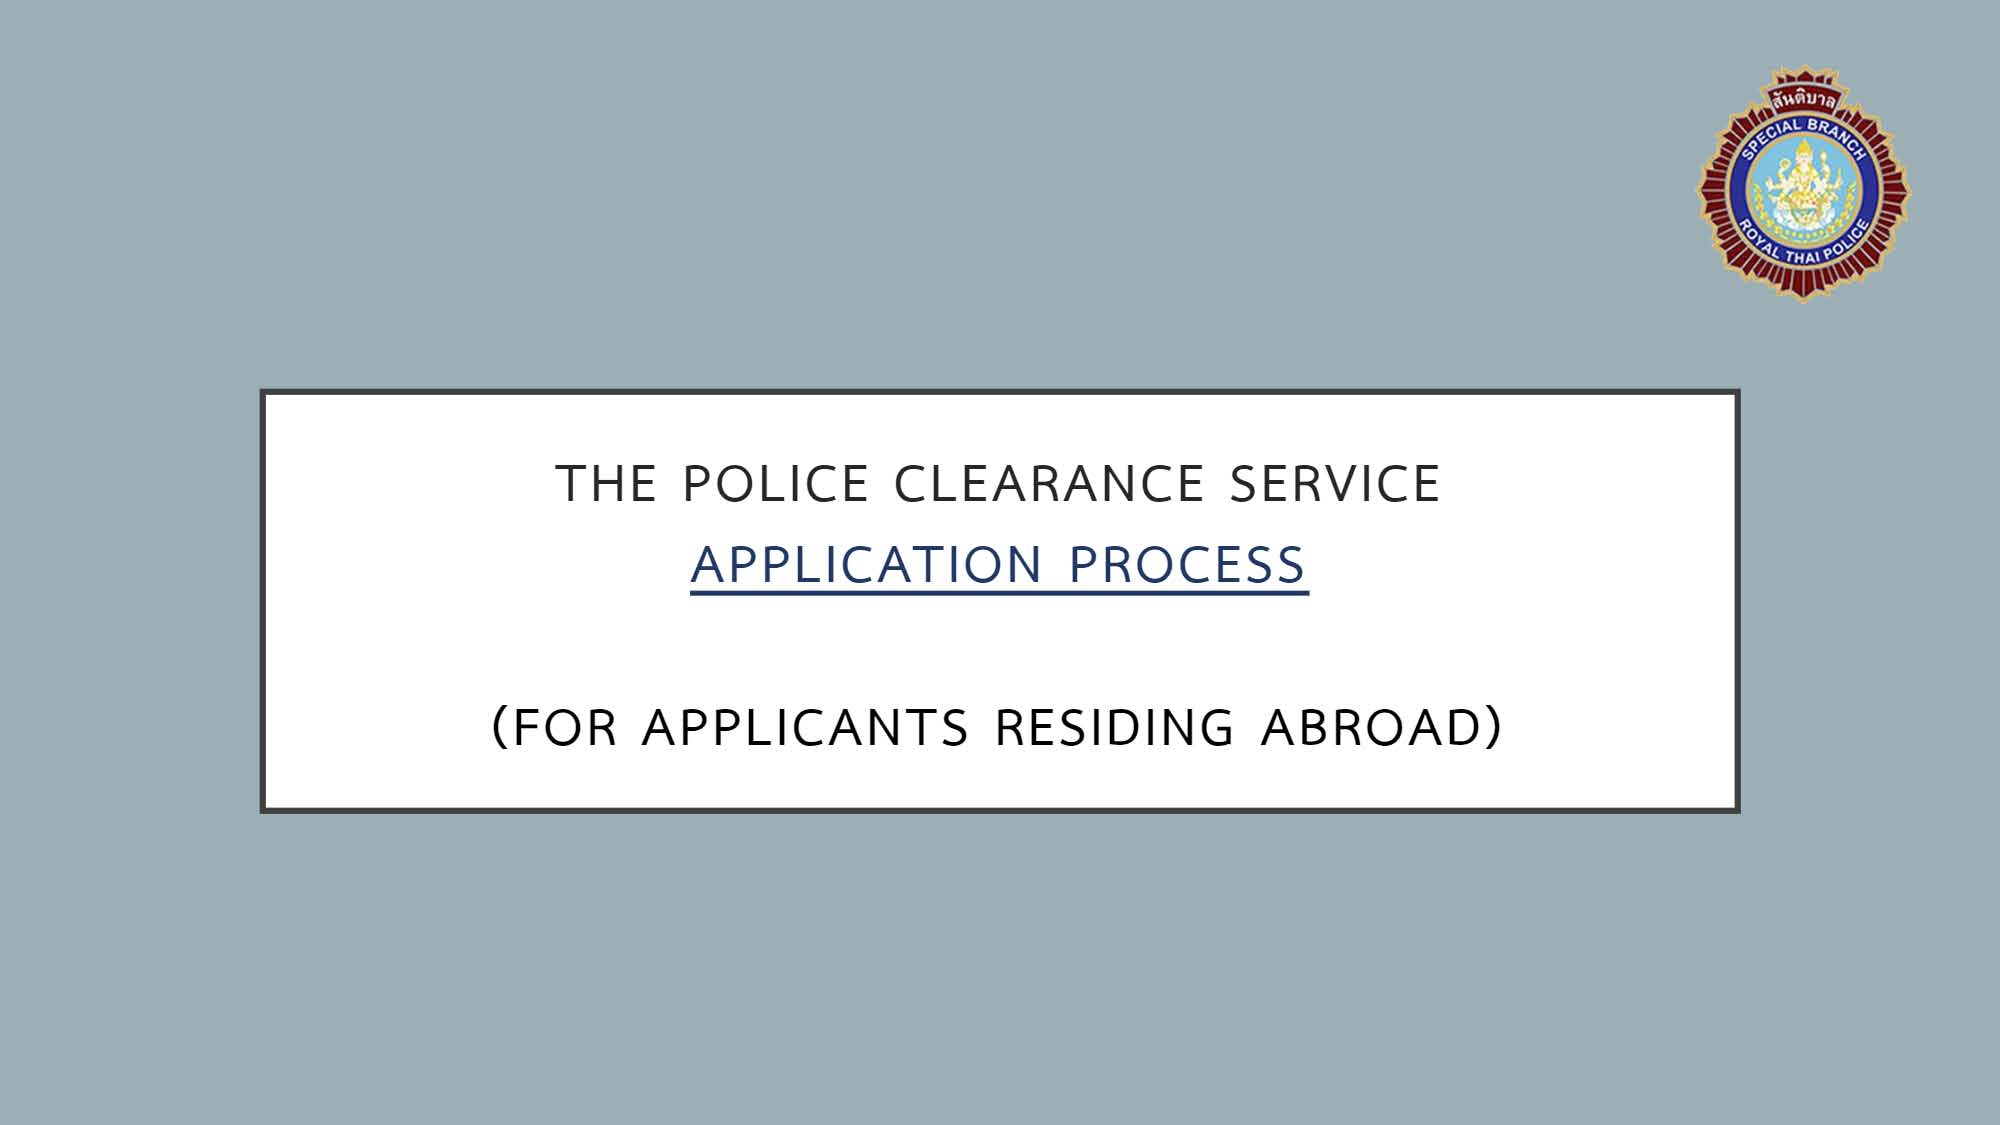 Request_for_a_Police_Clearance_Certificate_from_Thailand___FOR_APPLICANT_RESIDING_ABOARD_Page_1